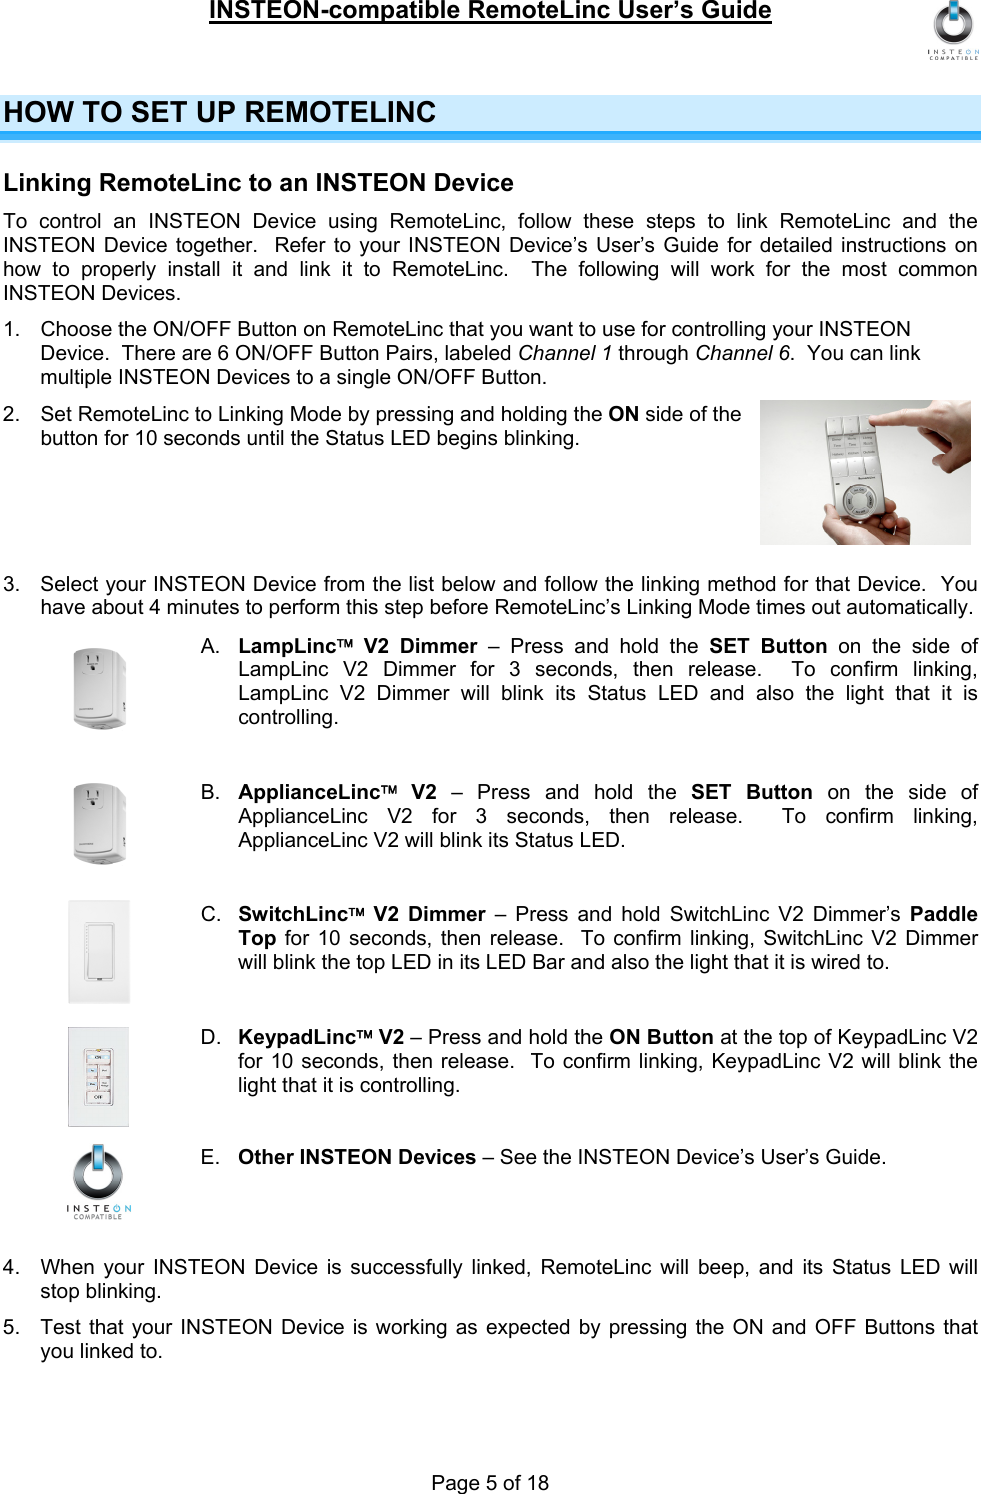 INSTEON-compatible RemoteLinc User’s Guide Page 5 of 18 HOW TO SET UP REMOTELINC Linking RemoteLinc to an INSTEON Device To control an INSTEON Device using RemoteLinc, follow these steps to link RemoteLinc and the INSTEON Device together.  Refer to your INSTEON Device’s User’s Guide for detailed instructions on how to properly install it and link it to RemoteLinc.  The following will work for the most common INSTEON Devices. 1.  Choose the ON/OFF Button on RemoteLinc that you want to use for controlling your INSTEON Device.  There are 6 ON/OFF Button Pairs, labeled Channel 1 through Channel 6.  You can link multiple INSTEON Devices to a single ON/OFF Button. 2.  Set RemoteLinc to Linking Mode by pressing and holding the ON side of the button for 10 seconds until the Status LED begins blinking.      3.  Select your INSTEON Device from the list below and follow the linking method for that Device.  You have about 4 minutes to perform this step before RemoteLinc’s Linking Mode times out automatically. A.  LampLinc™ V2 Dimmer – Press and hold the SET Button on the side of LampLinc V2 Dimmer for 3 seconds, then release.  To confirm linking, LampLinc V2 Dimmer will blink its Status LED and also the light that it is controlling.  B.  ApplianceLinc™ V2 – Press and hold the SET Button on the side of ApplianceLinc V2 for 3 seconds, then release.  To confirm linking, ApplianceLinc V2 will blink its Status LED.  C.  SwitchLinc™ V2 Dimmer – Press and hold SwitchLinc V2 Dimmer’s Paddle Top for 10 seconds, then release.  To confirm linking, SwitchLinc V2 Dimmer will blink the top LED in its LED Bar and also the light that it is wired to.  D.  KeypadLinc™ V2 – Press and hold the ON Button at the top of KeypadLinc V2 for 10 seconds, then release.  To confirm linking, KeypadLinc V2 will blink the light that it is controlling.  E.  Other INSTEON Devices – See the INSTEON Device’s User’s Guide.   4.  When your INSTEON Device is successfully linked, RemoteLinc will beep, and its Status LED will stop blinking. 5.  Test that your INSTEON Device is working as expected by pressing the ON and OFF Buttons that you linked to. 